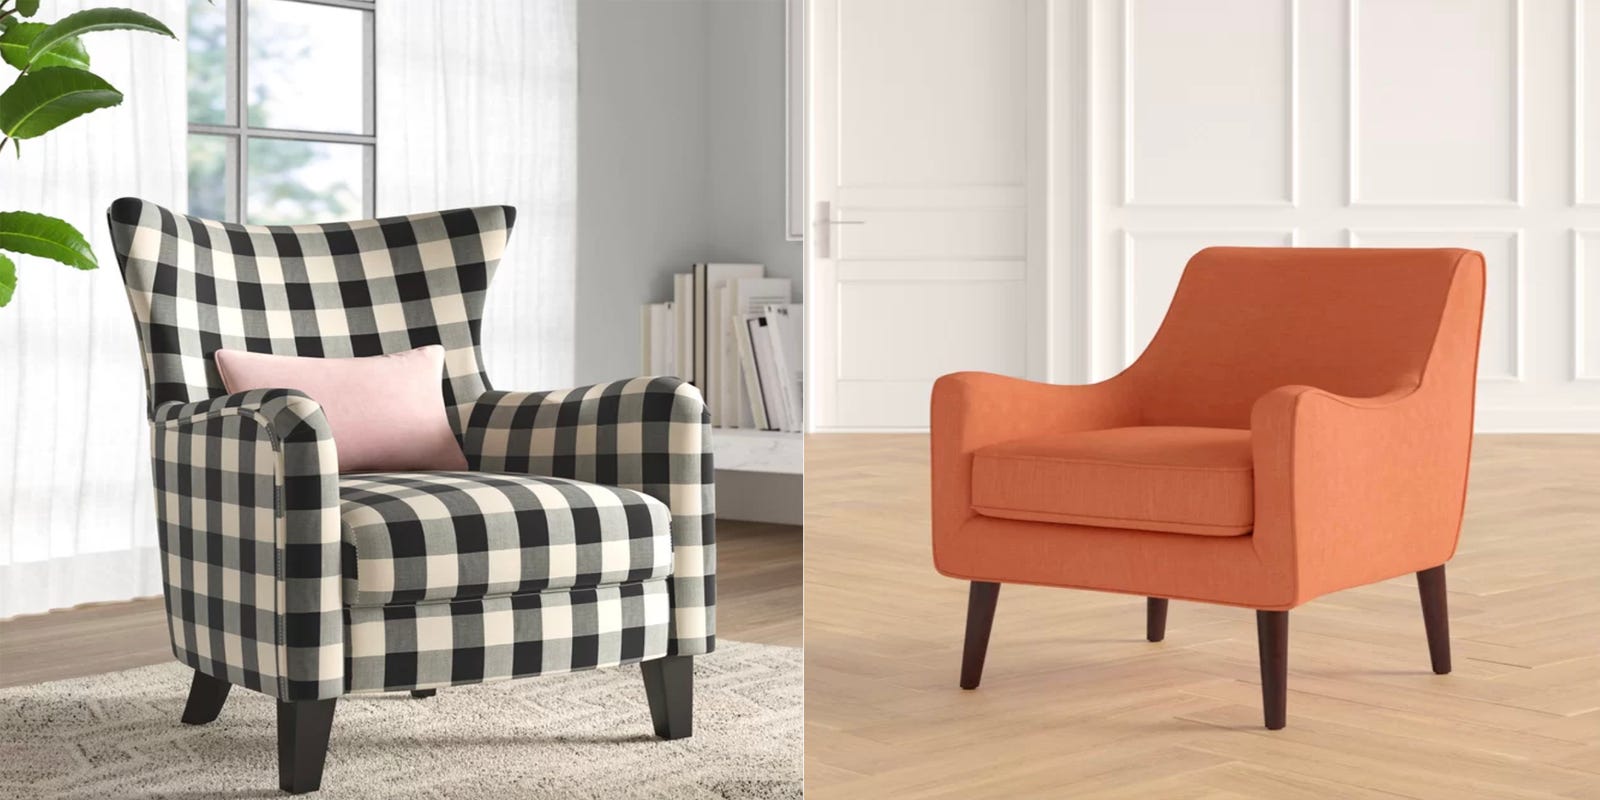 Labor Day furniture sales: Save at Wayfair, Home Depot and more